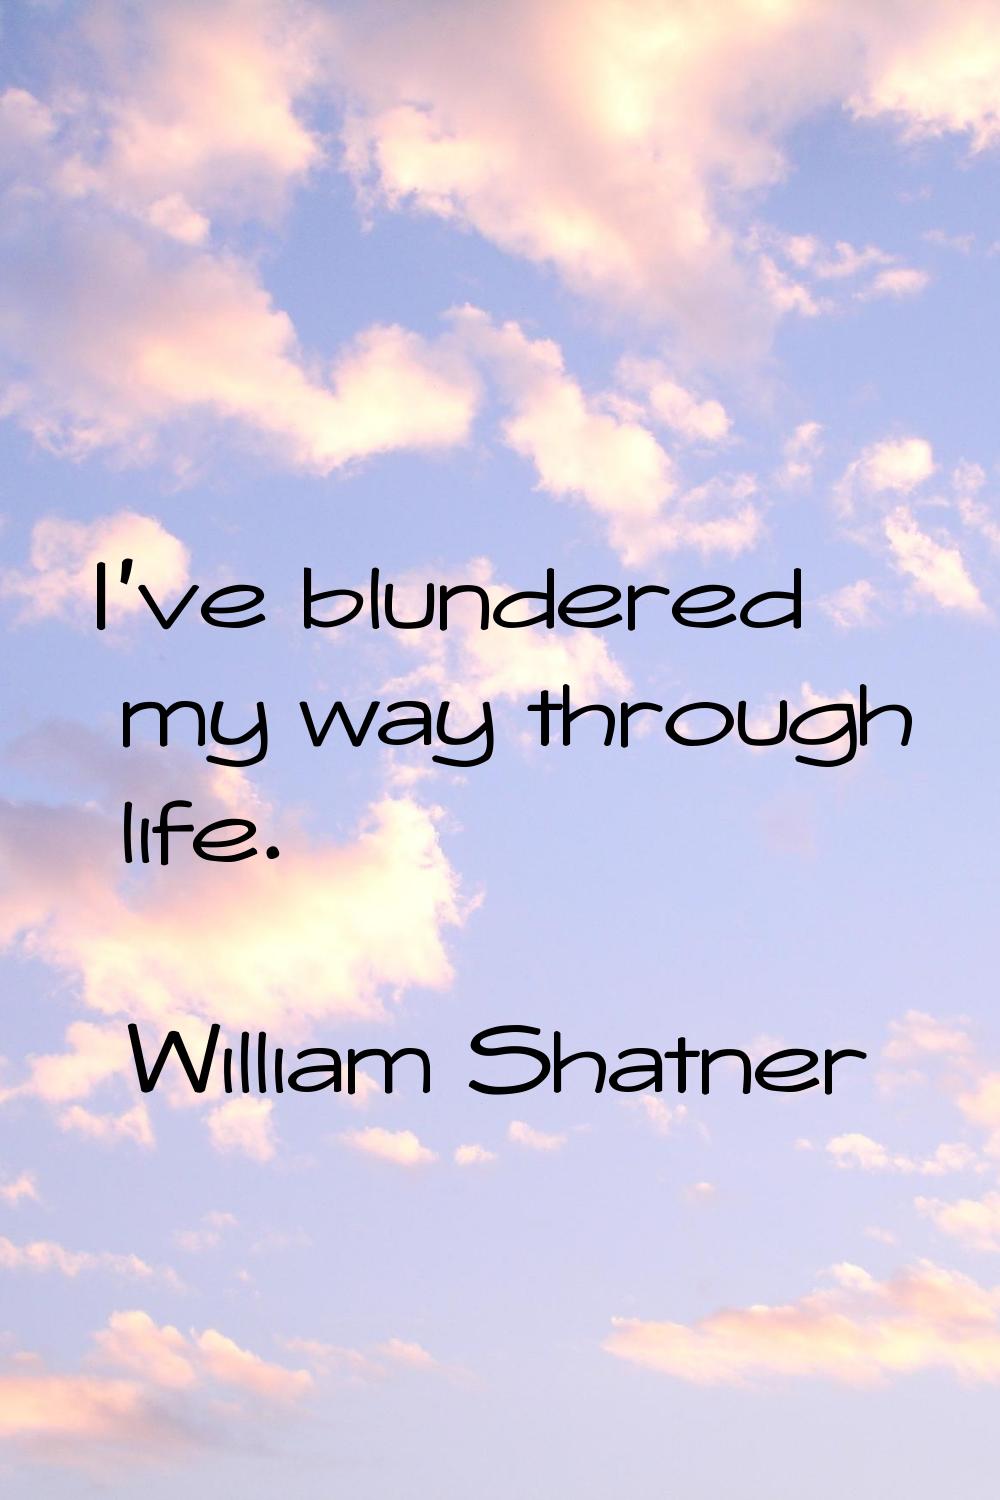 I've blundered my way through life.